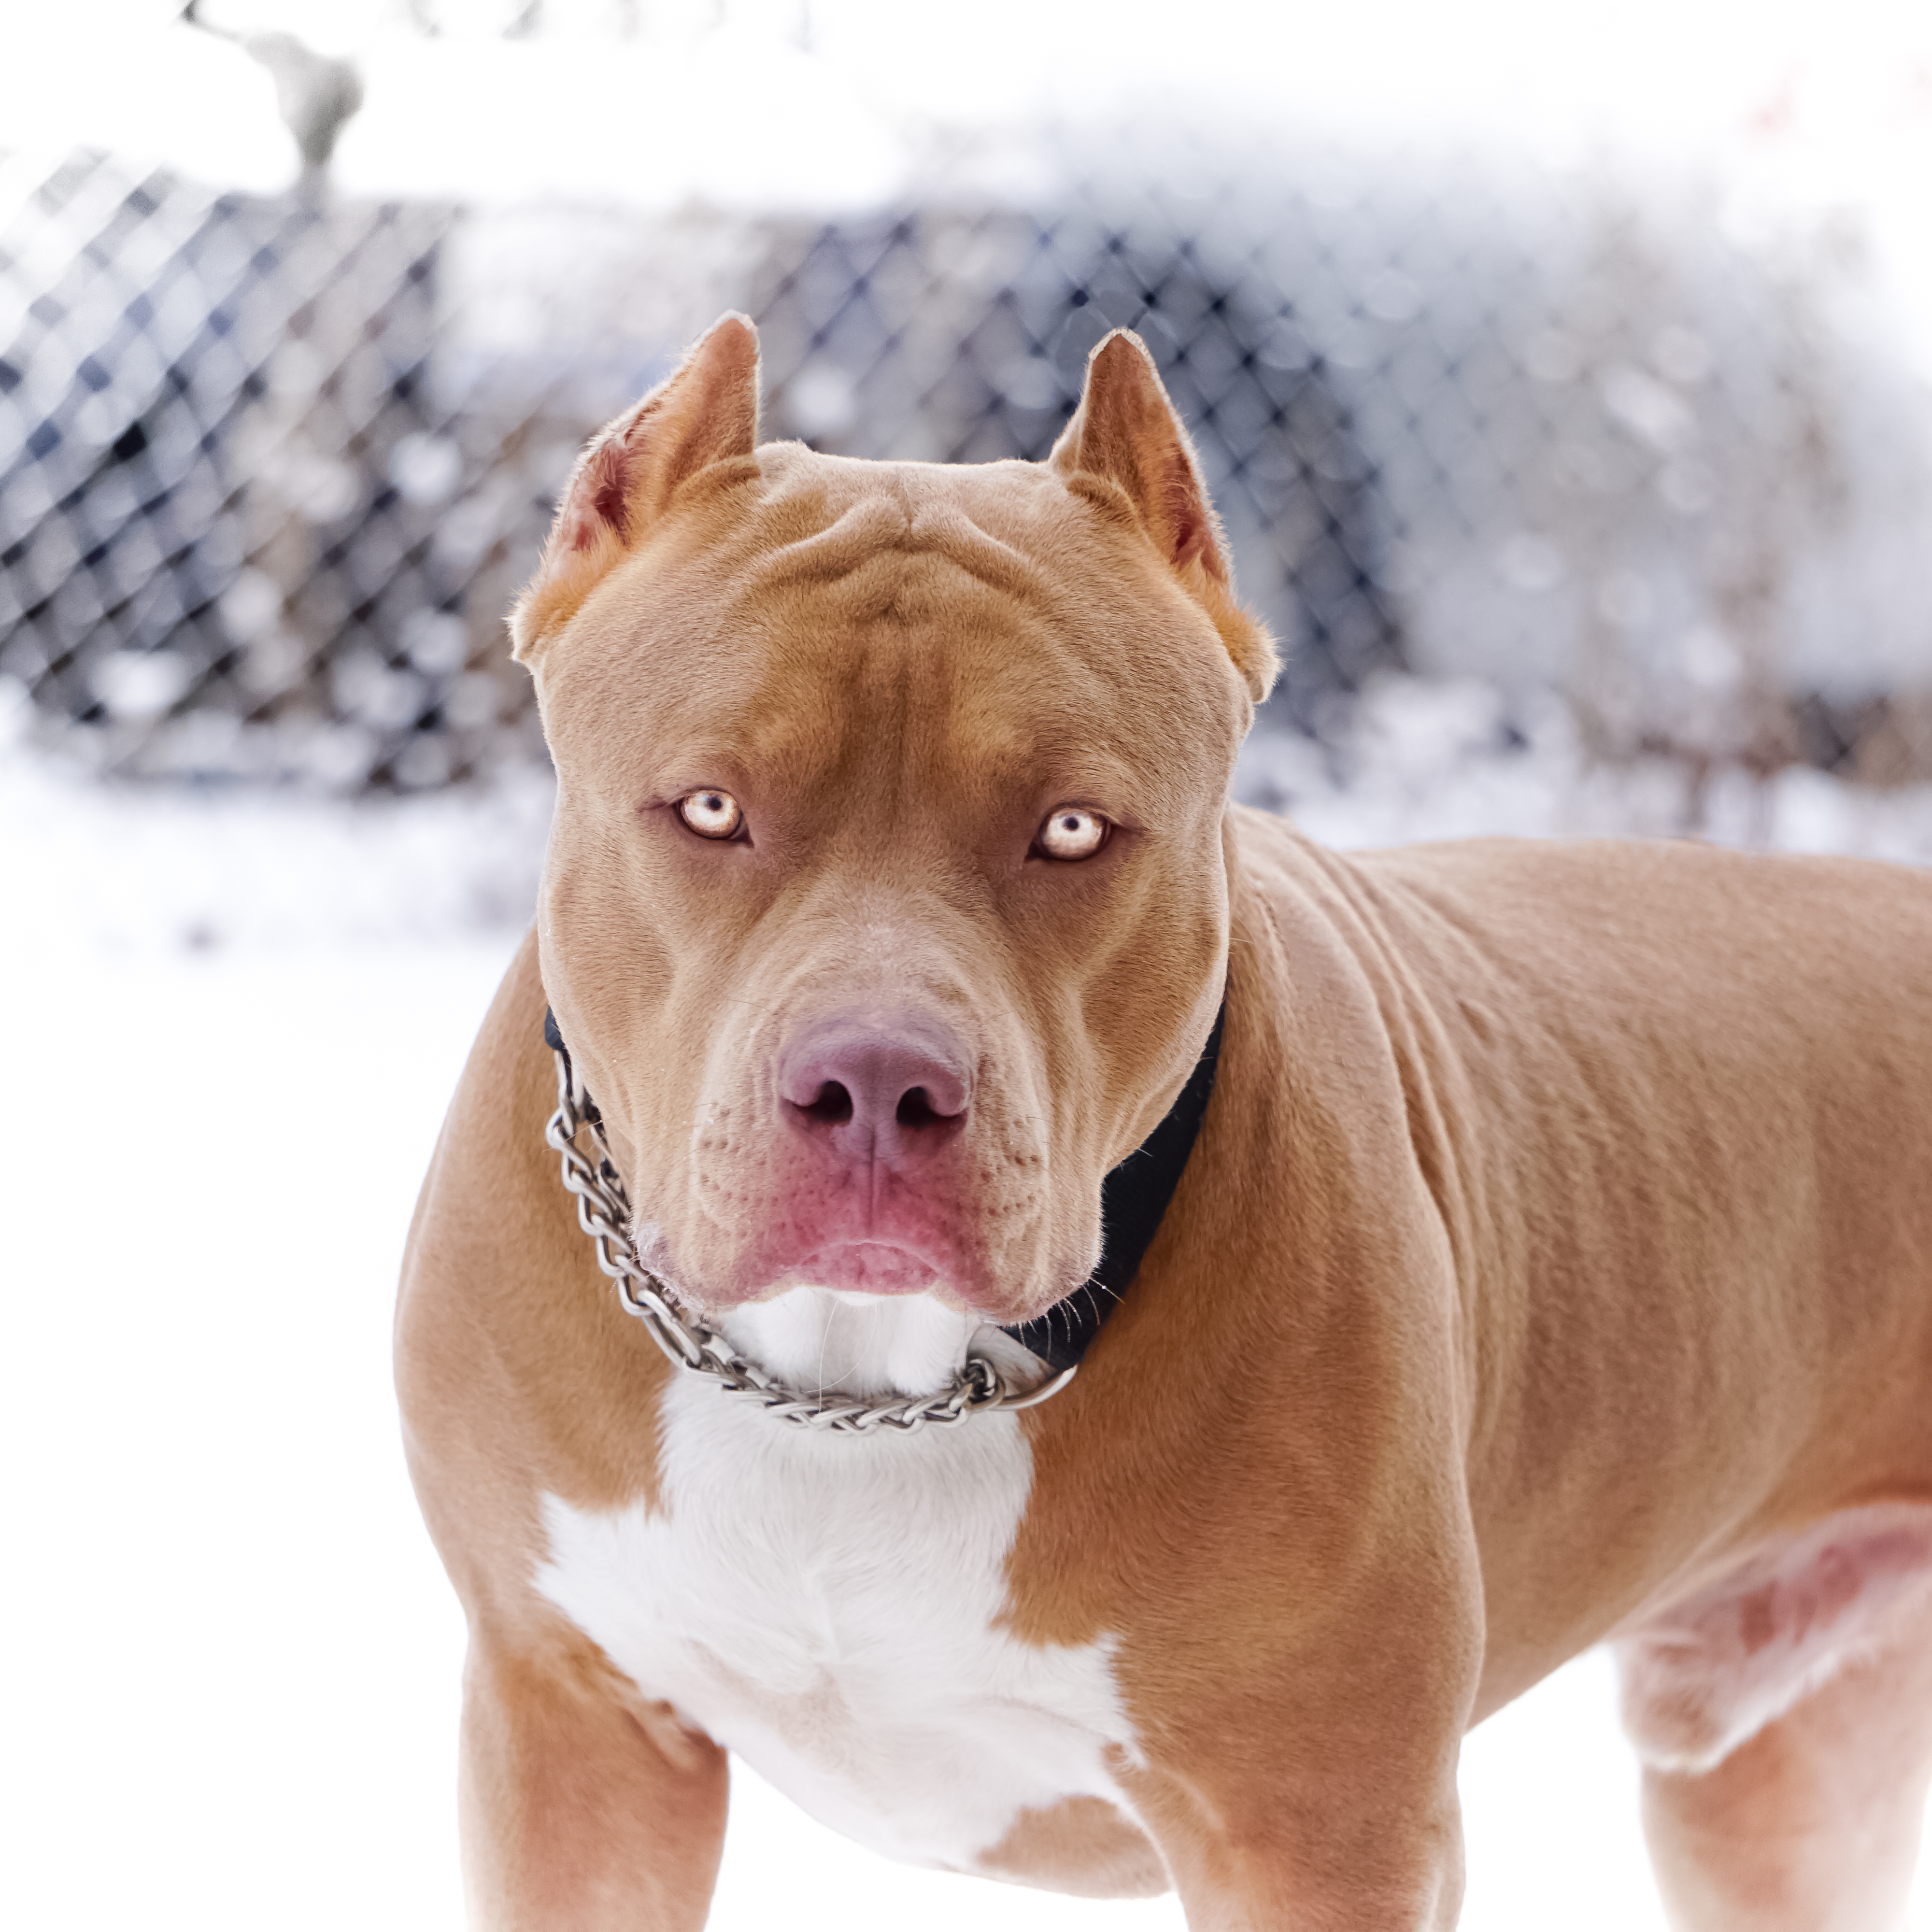 9 Things You Should “Nose” about the Blue Nose Pitbull - Animalso